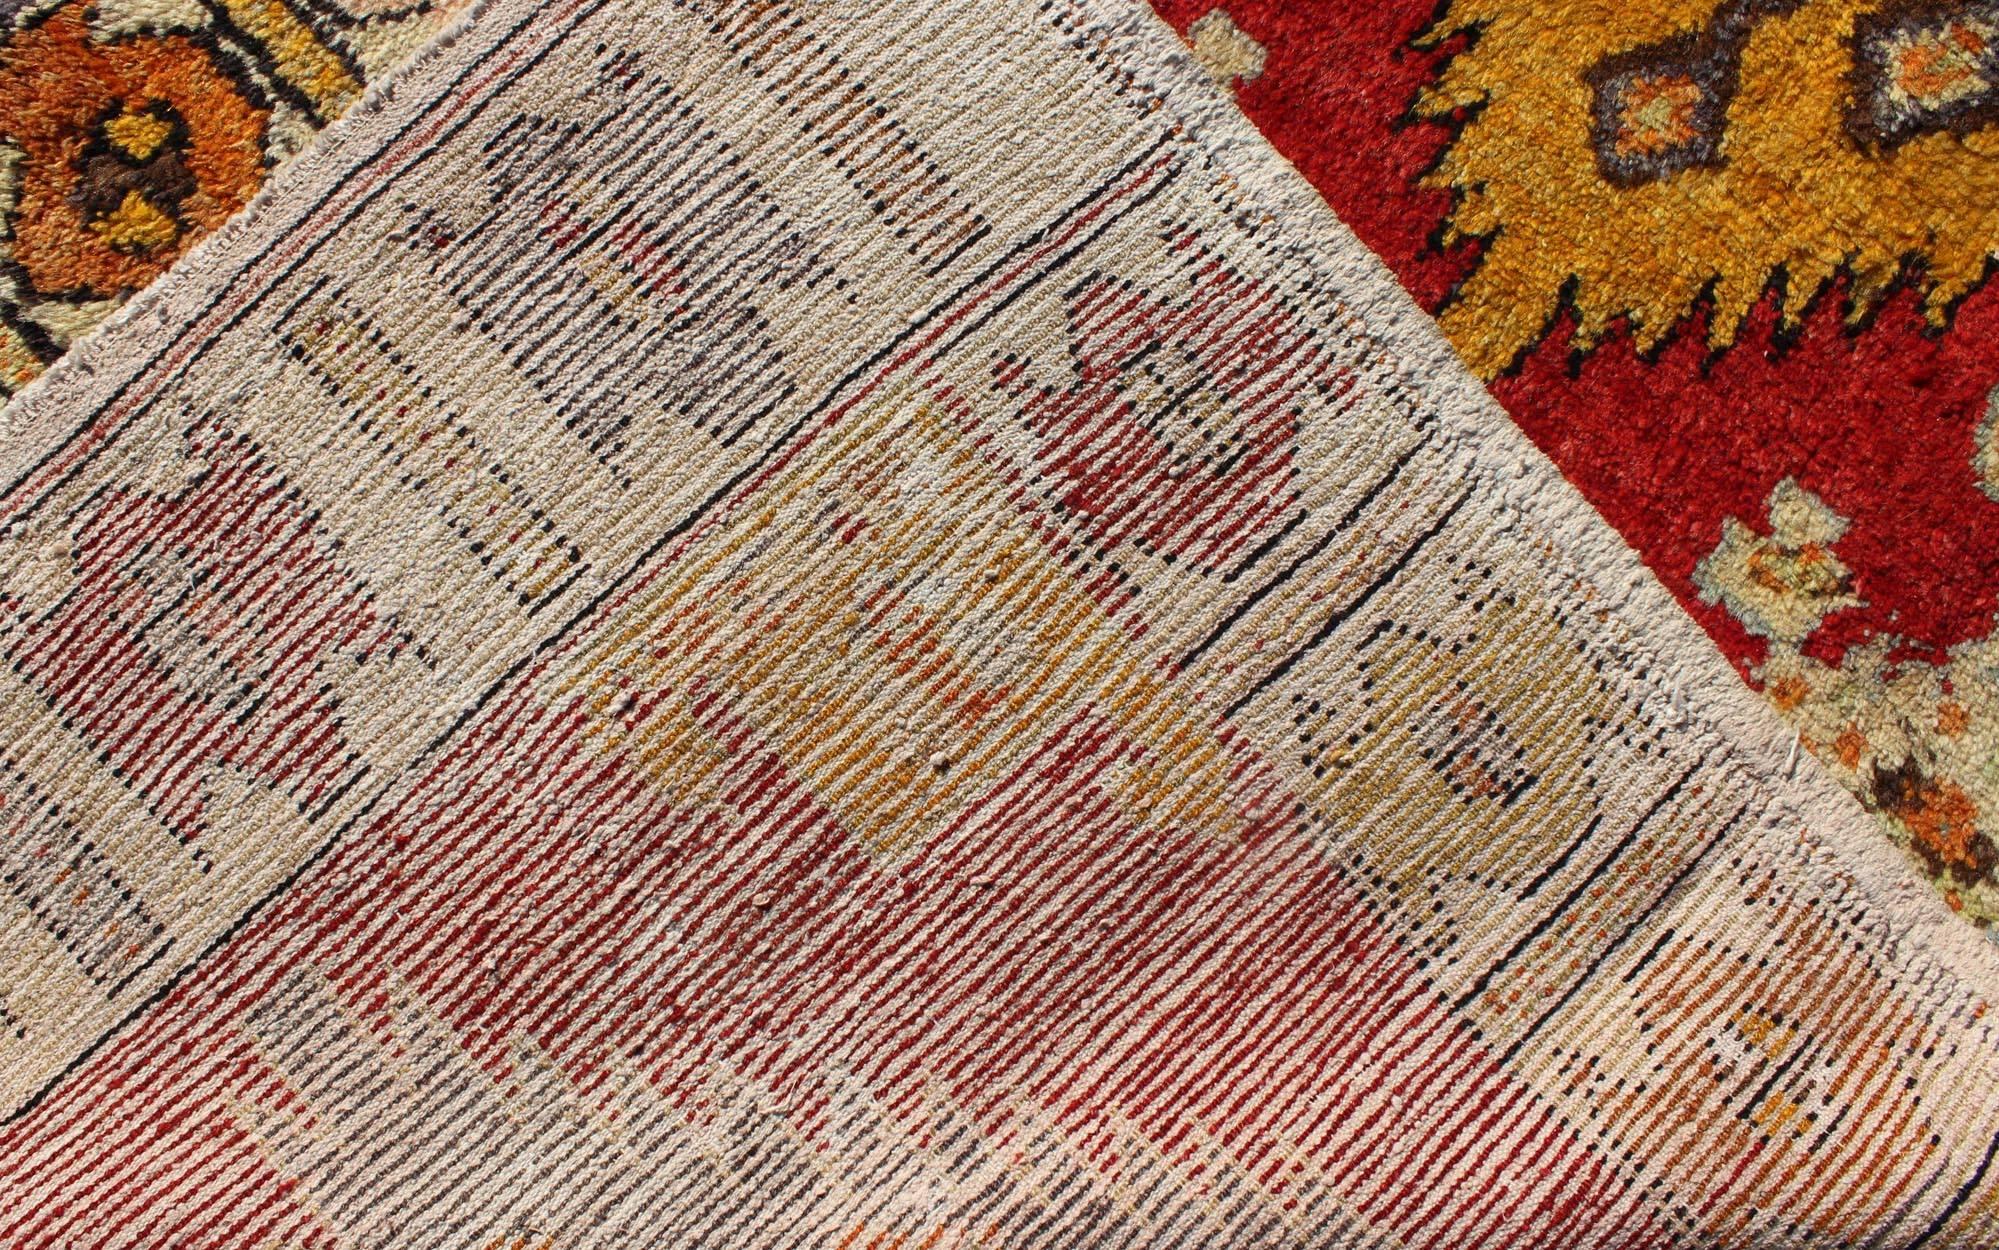 Tribal Turkish Oushak Runner with bright colors in Red, Gold, Yellow and Orange For Sale 3